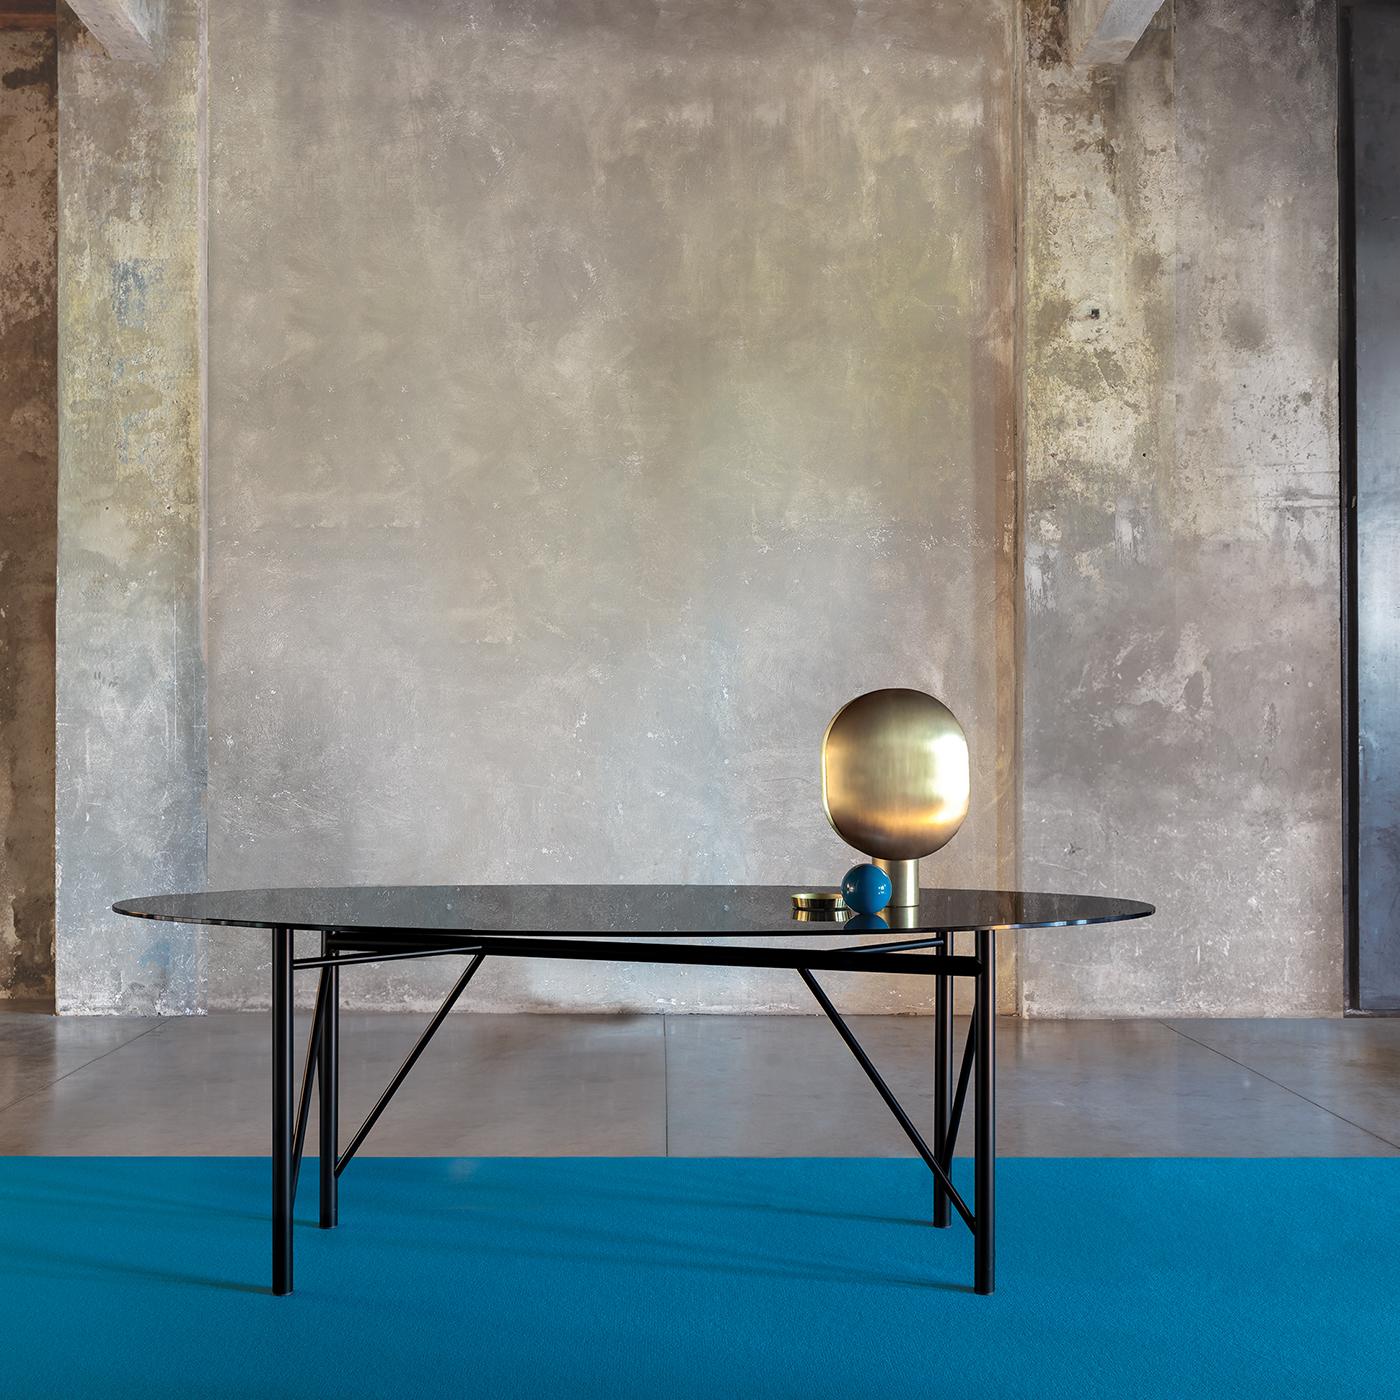 On a refined metal base in a black powder coated finish, the Tubular oval dining table is topped with a gray glass top that allows the base to take center stage. The epitome of contemporary cool, the table is designed for minimalist spaces. The